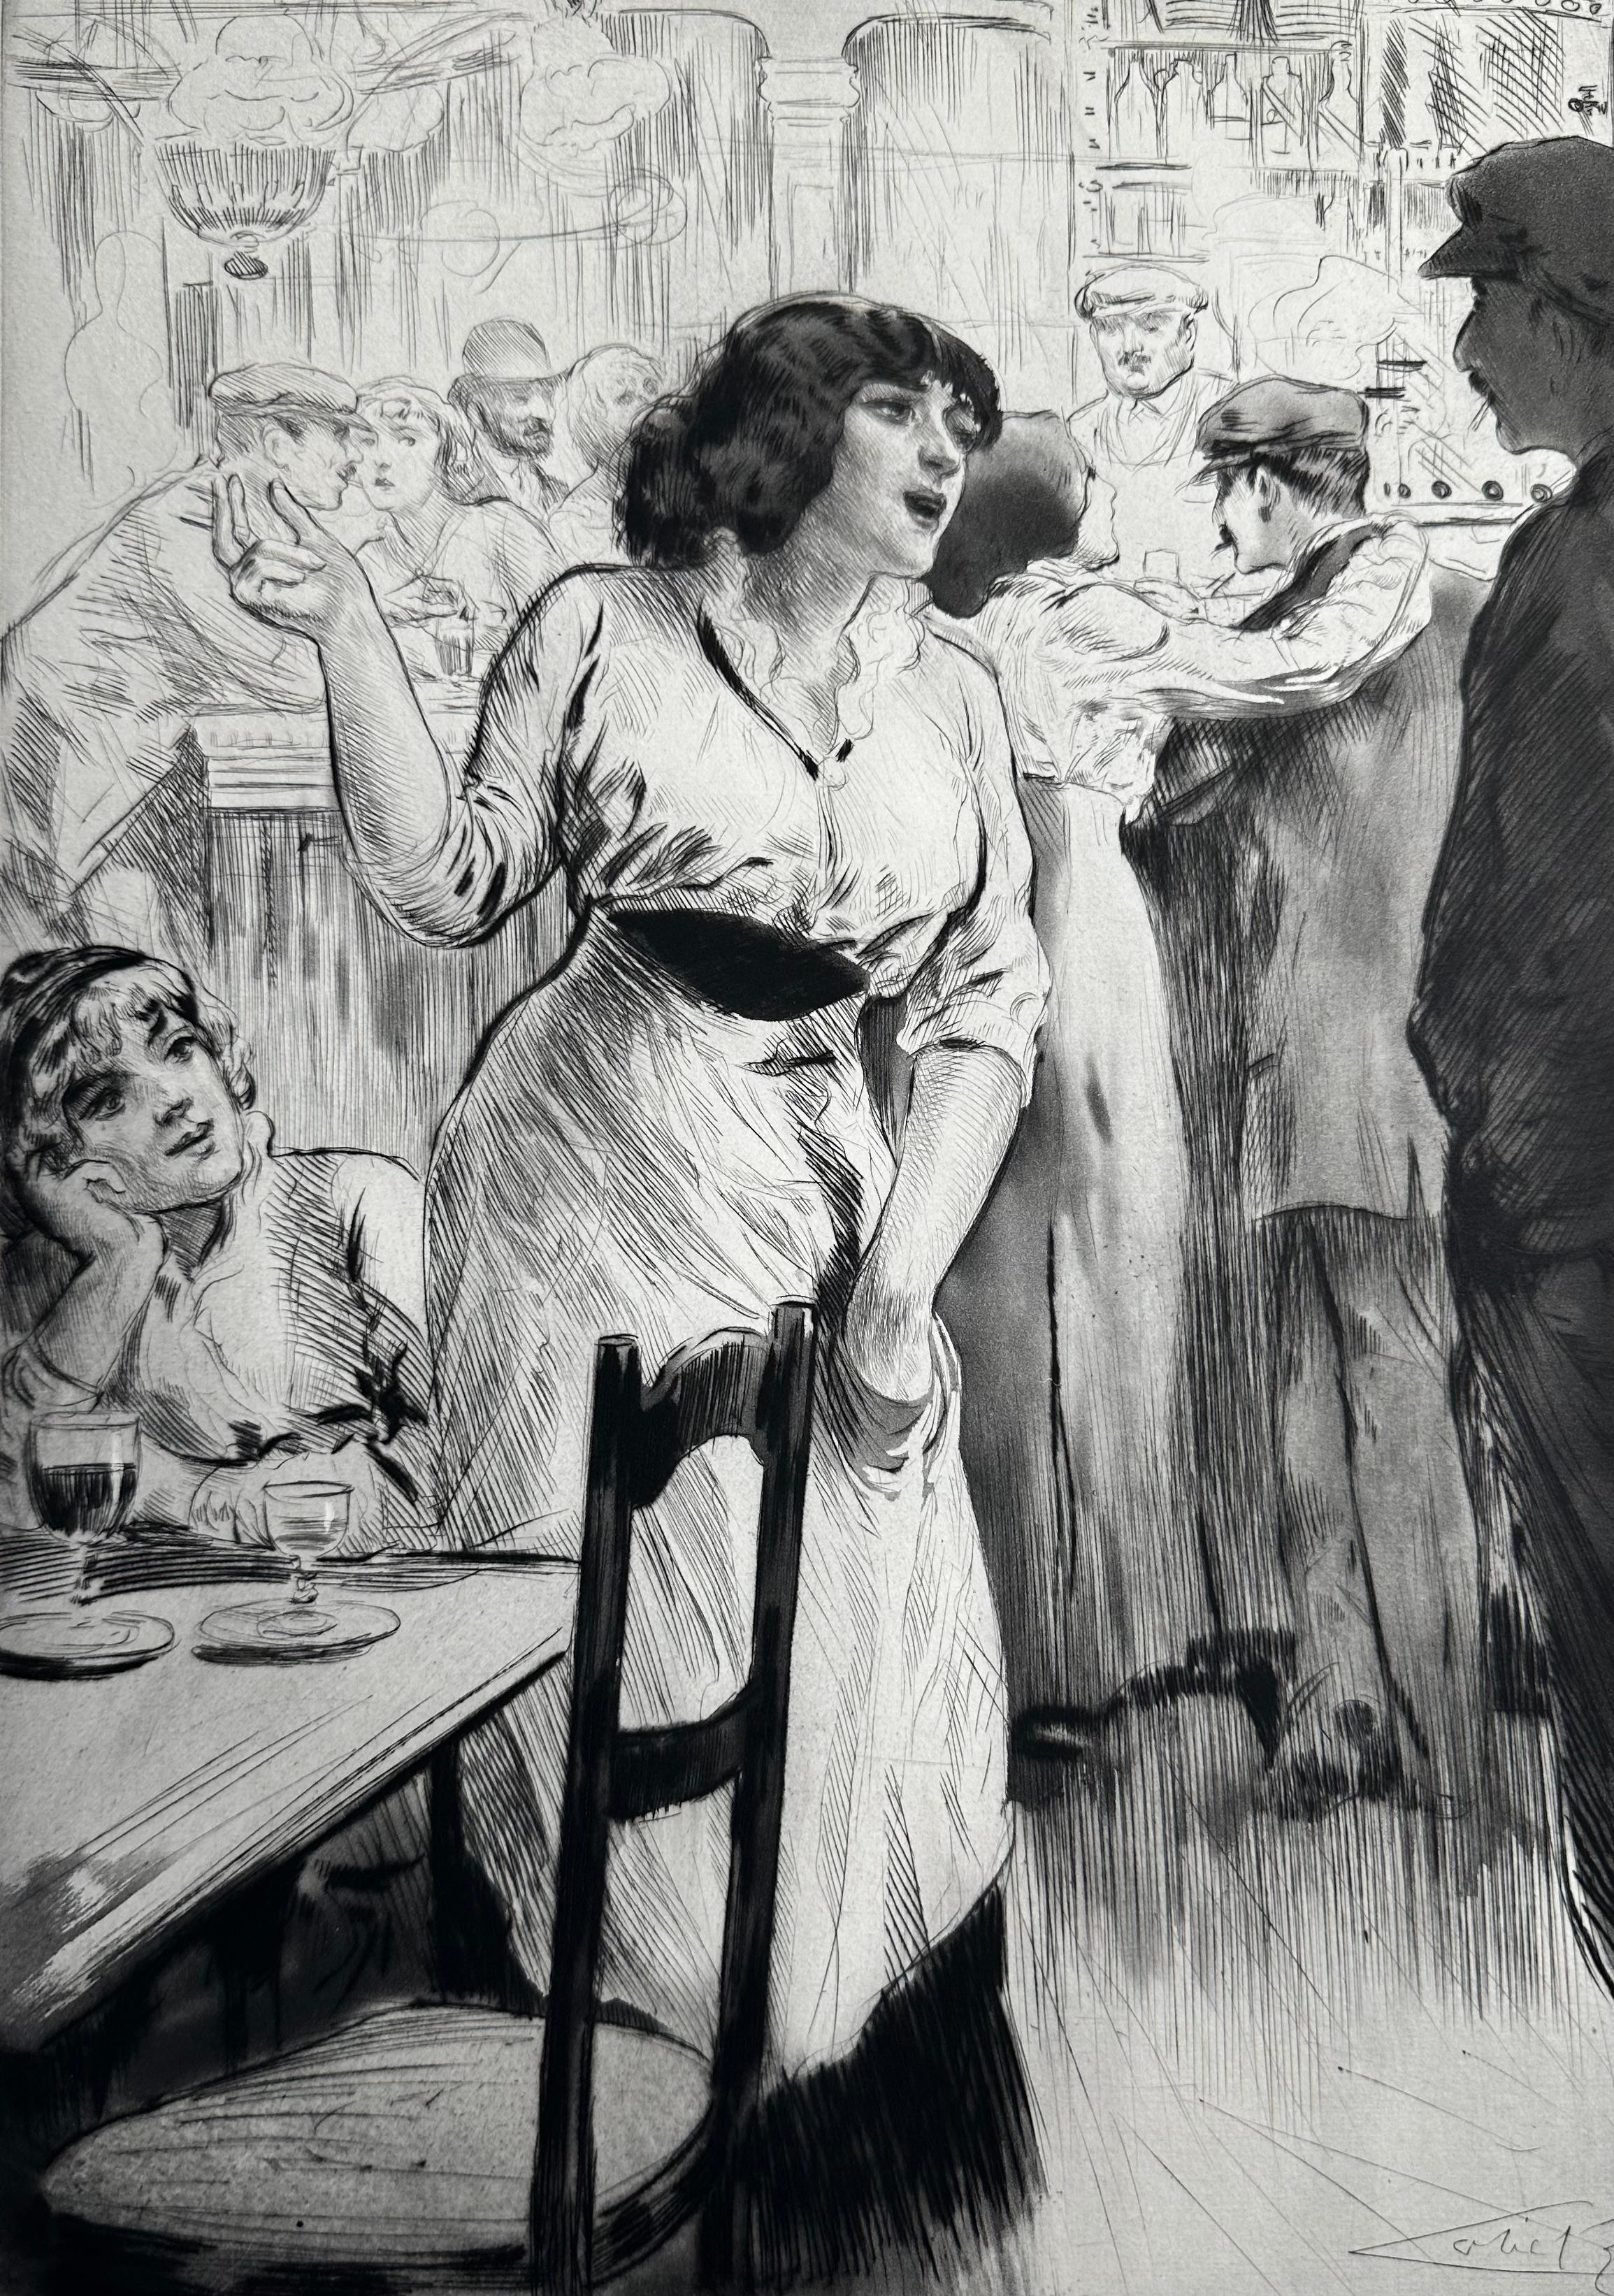 6 plates from the Lobel- Riche books, Les Bars depicting pre- war Paris fashions in the bars and nightclubs.   